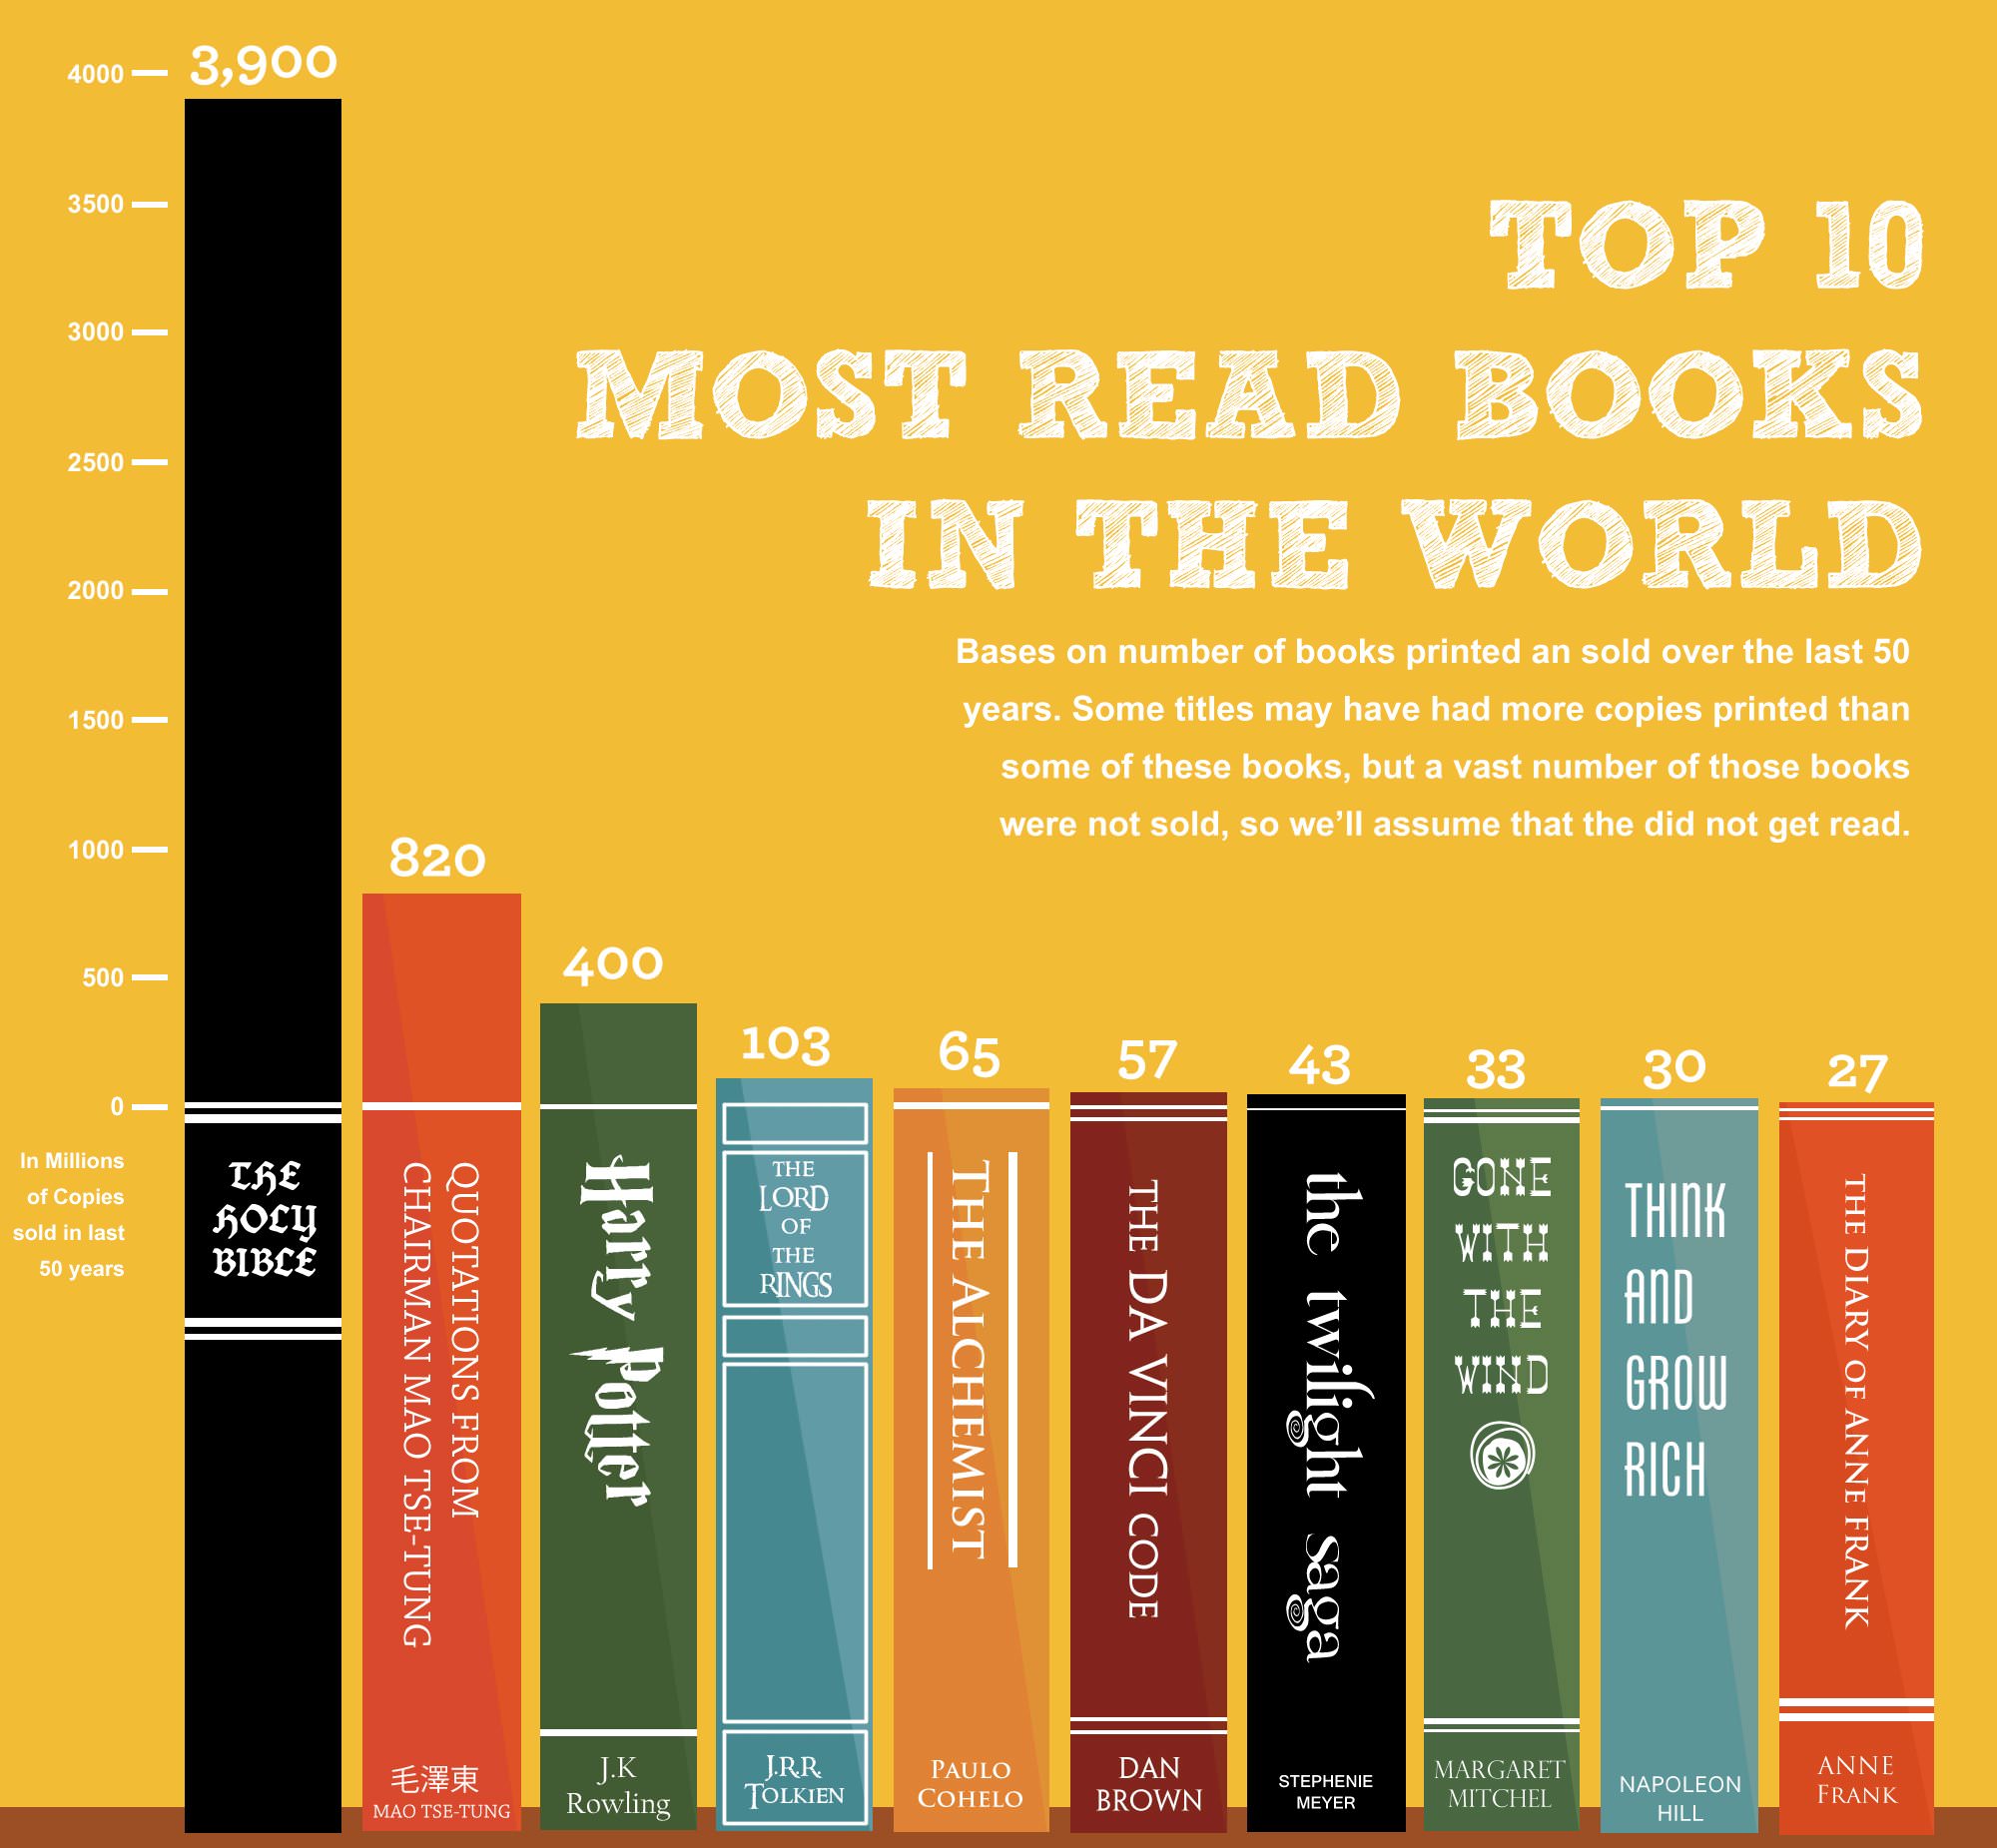 Bar chart top 10 books by sales